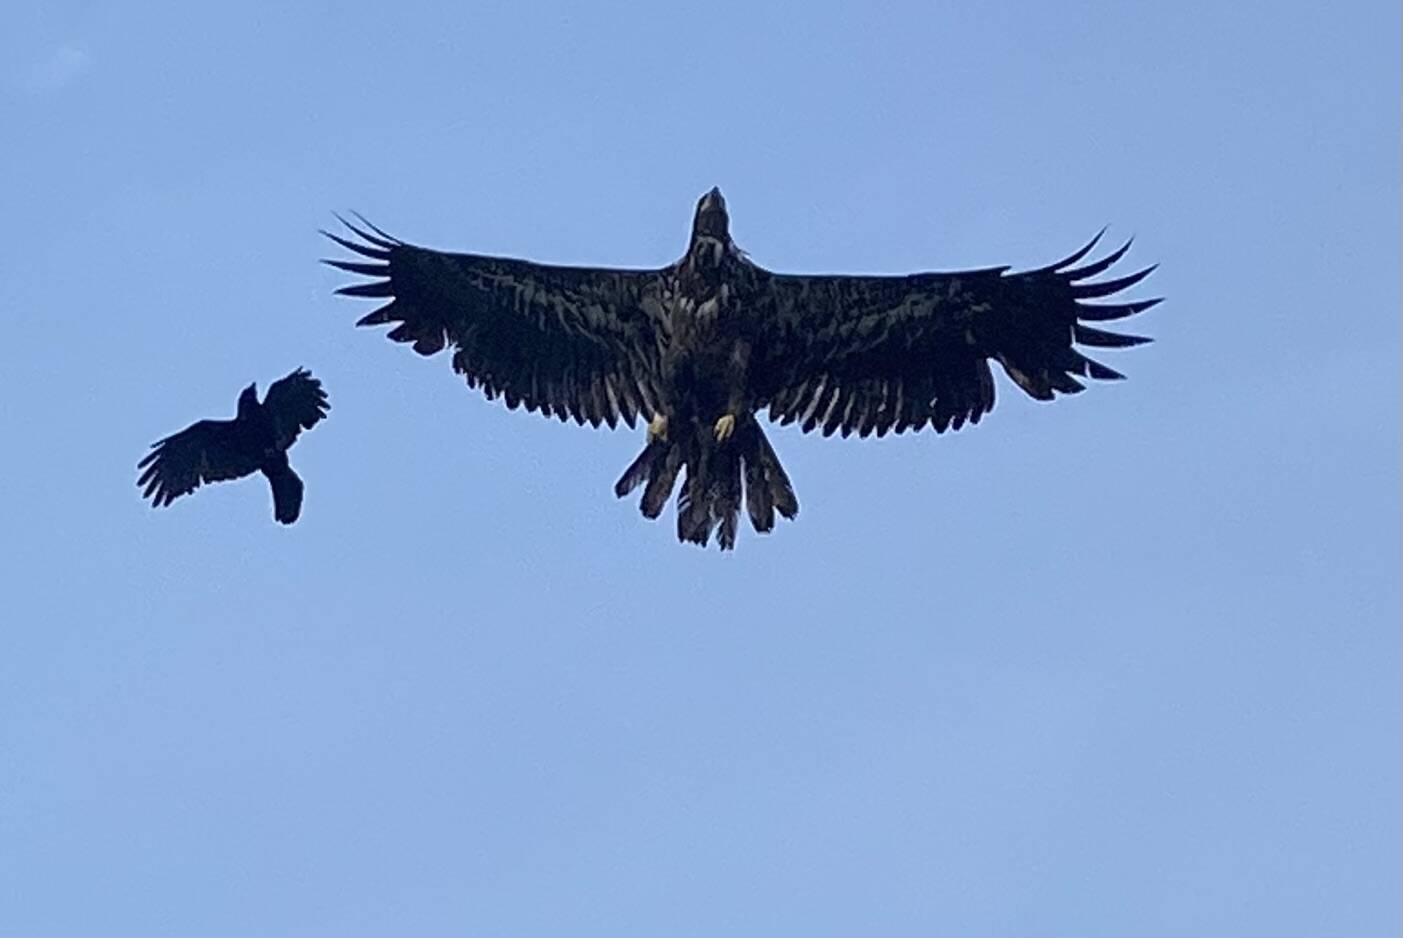 A crow harasses a juvenile eagle during its flying lesson above Channel Heights on July 5. (Courtesy Photo / Denise Carooll)